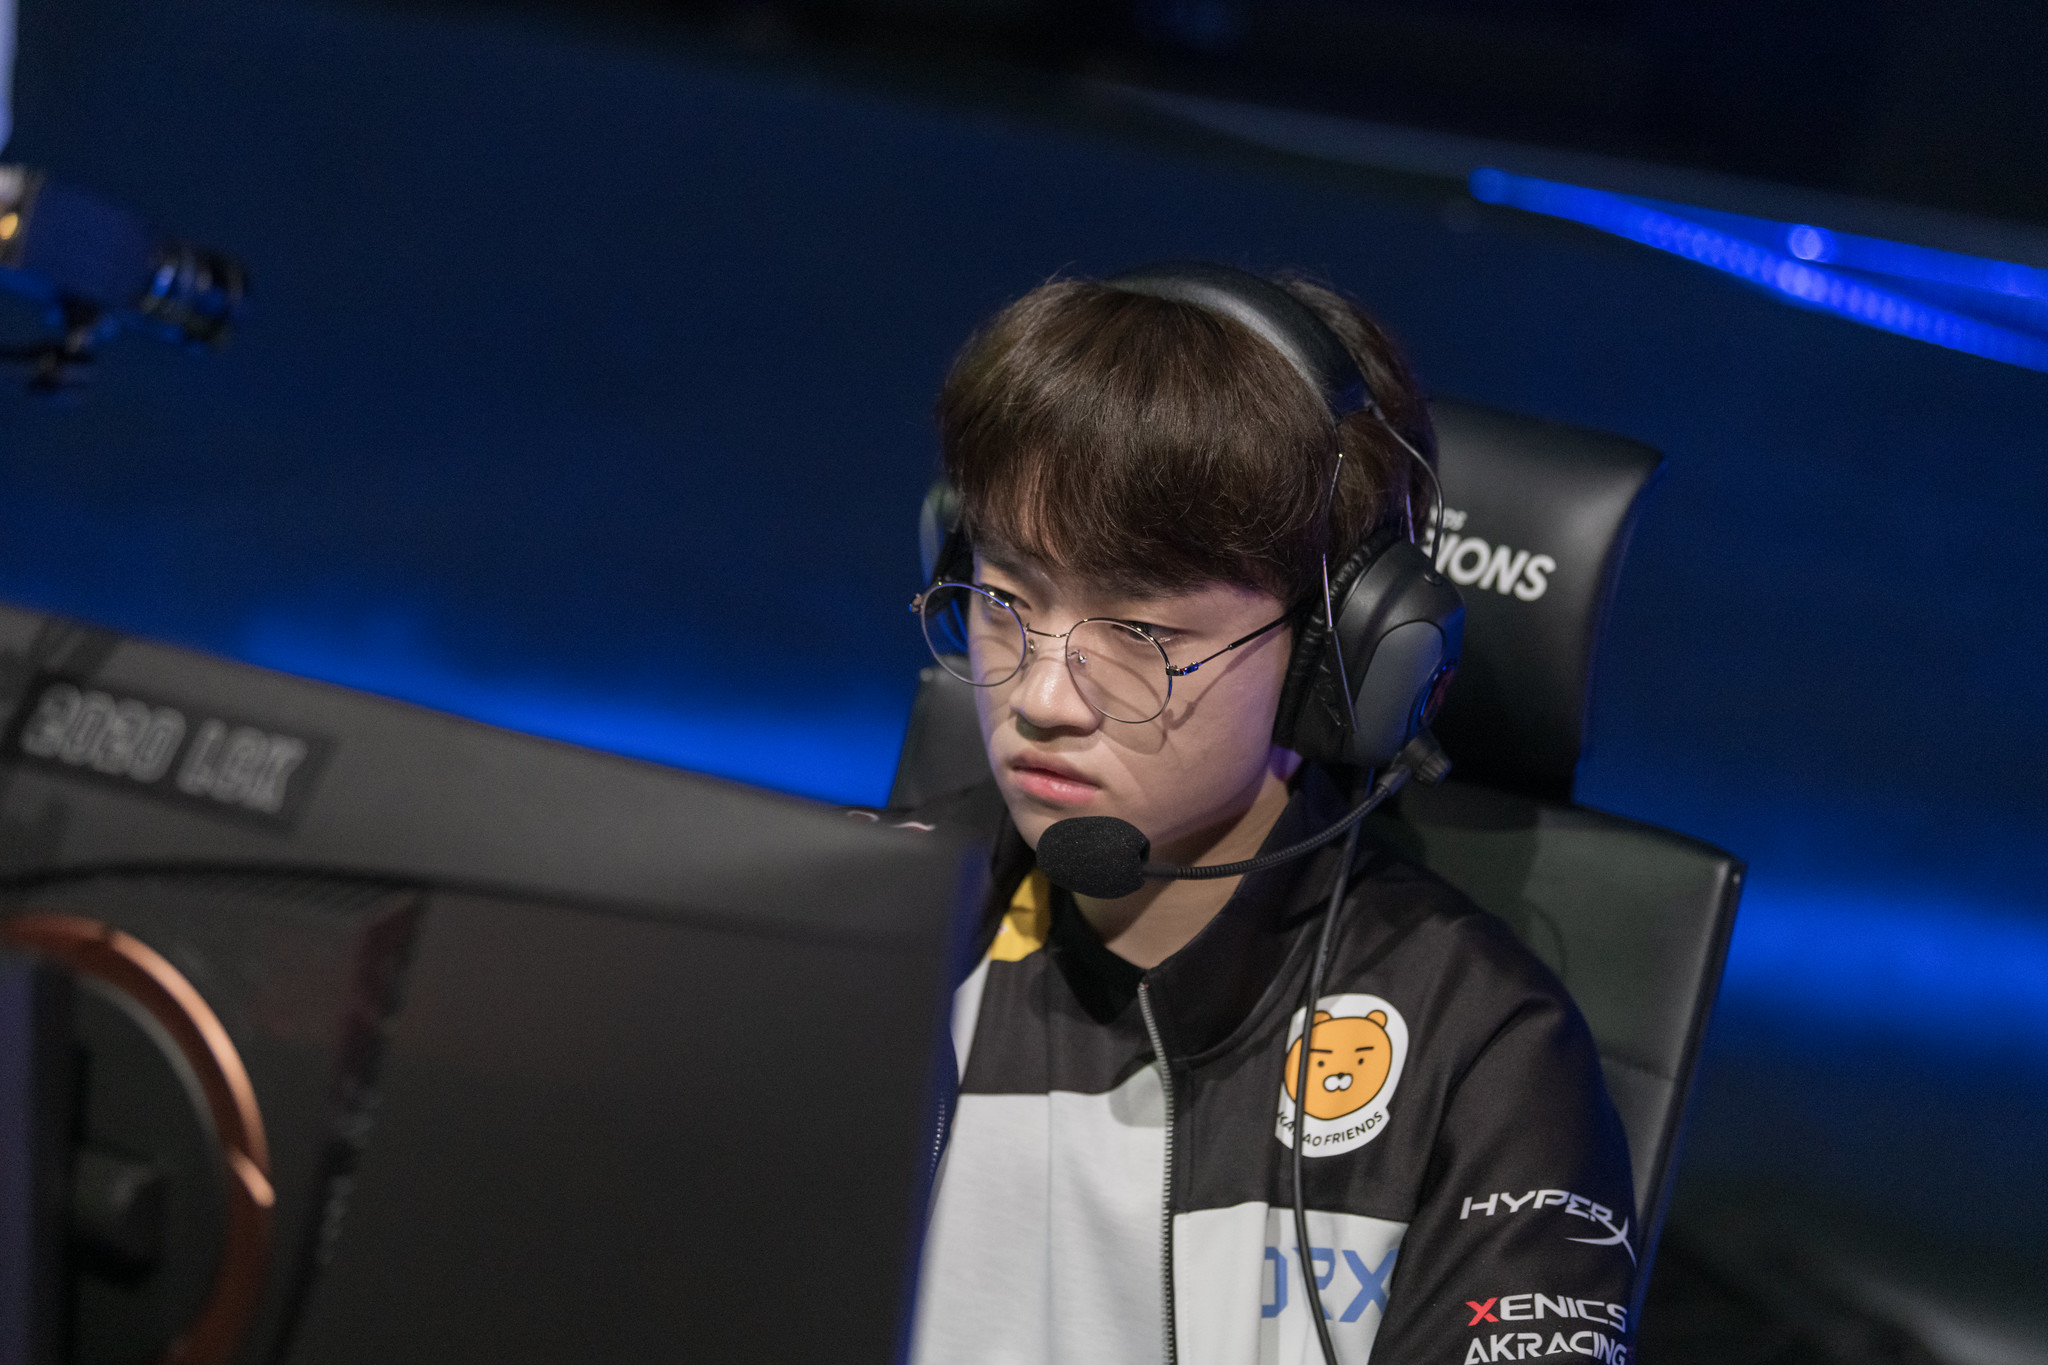 Keria playing at LoL Park as DRX beat T1 in the LCK.